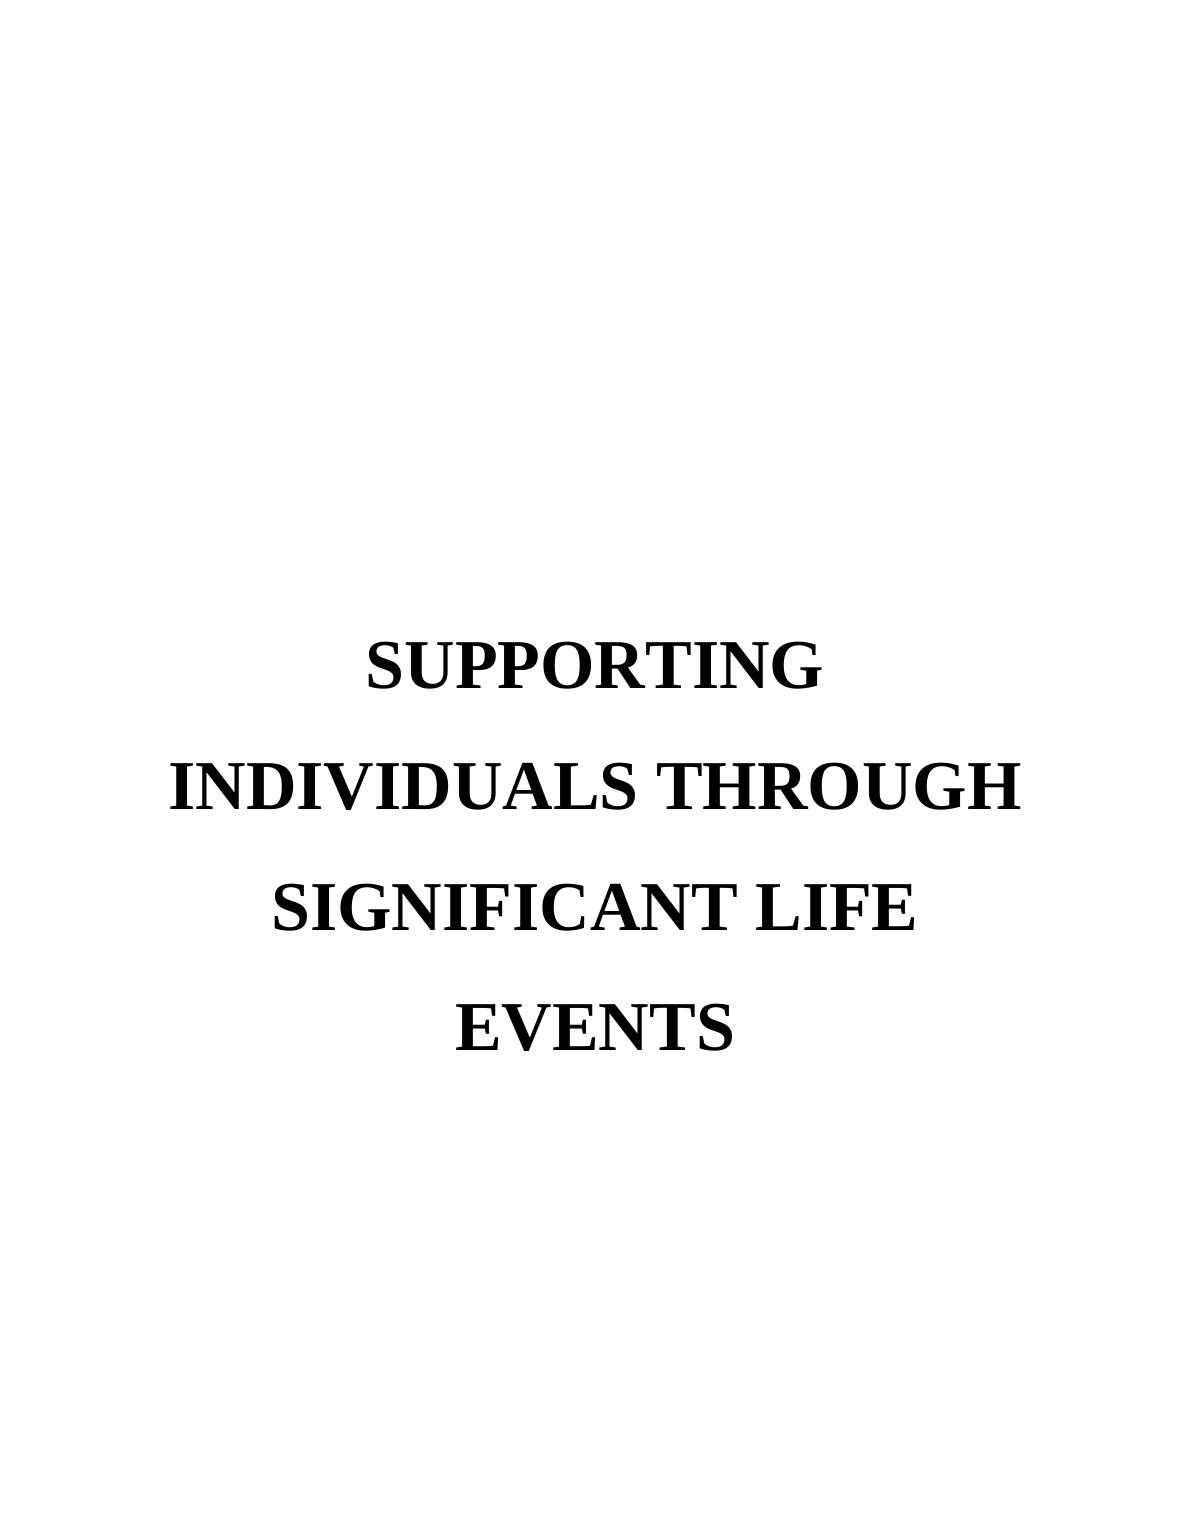 Supporting Individuals Through Significant Life Events_1